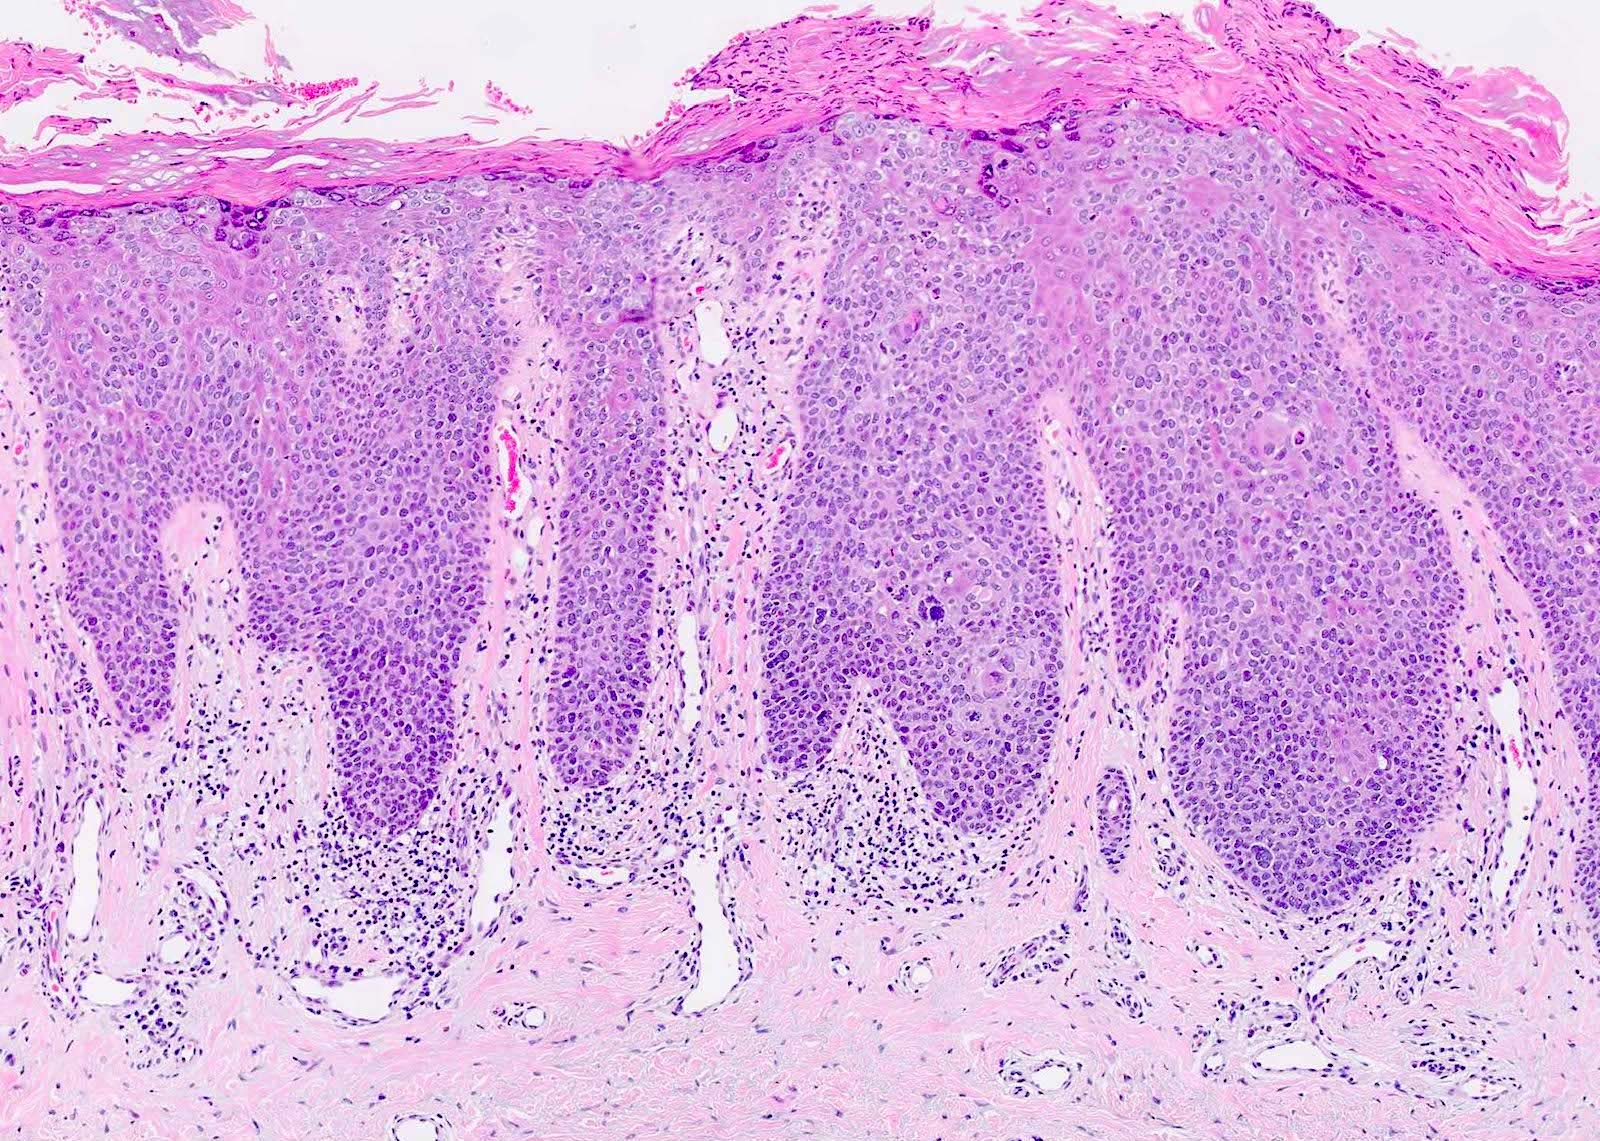 Squamous Cell Carcinoma In Situ Histology